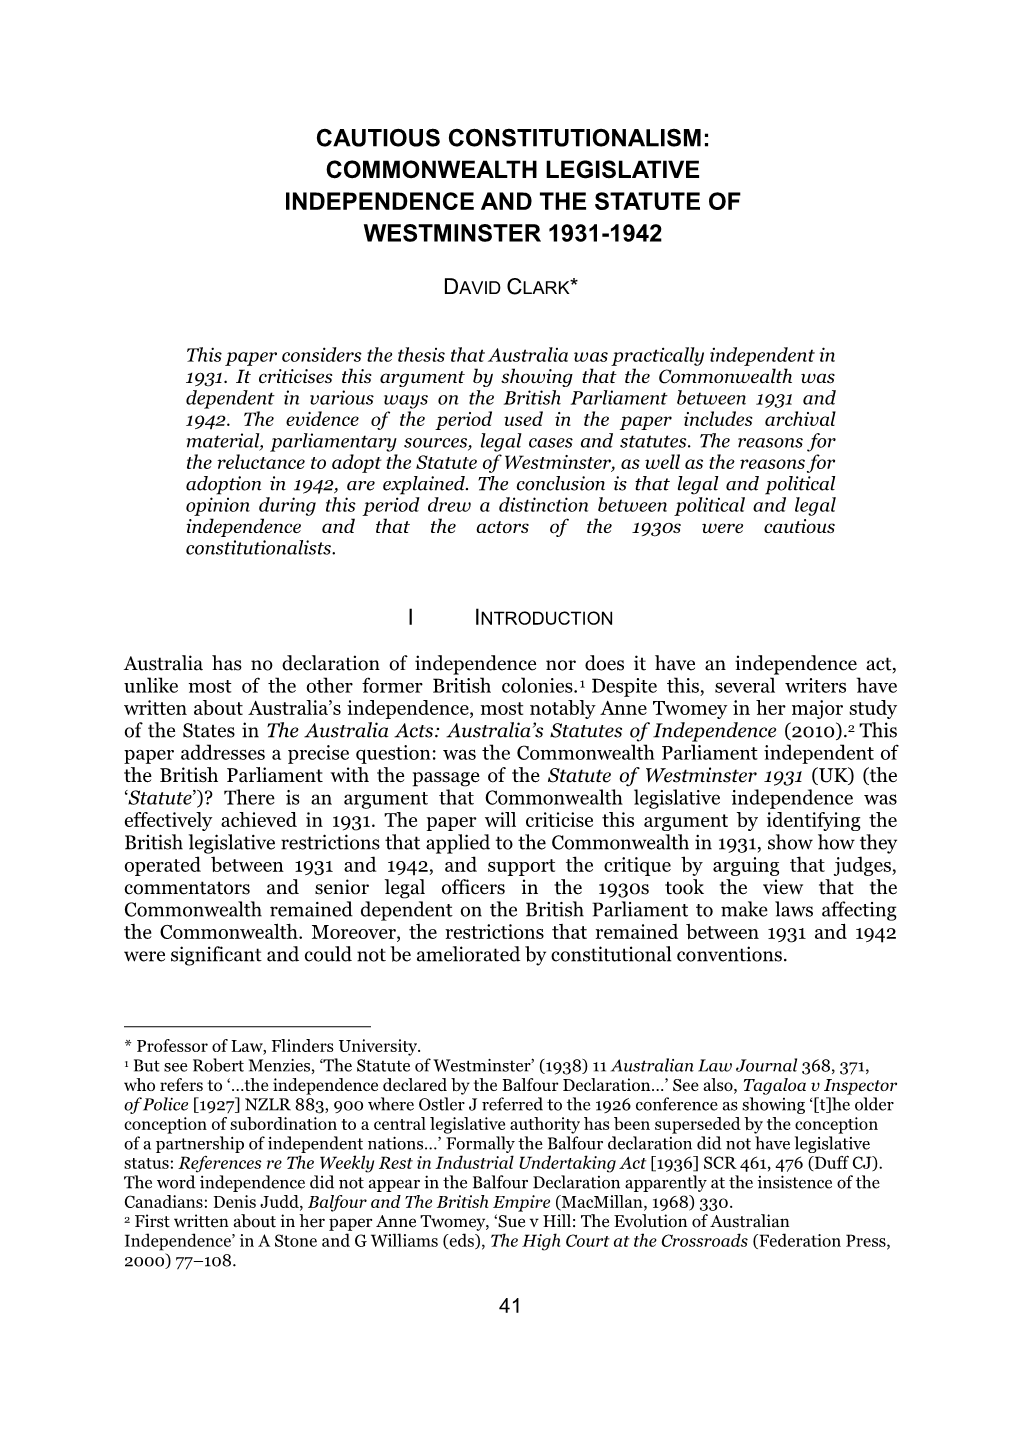 Commonwealth Legislative Independence and the Statute of Westminster 1931-1942